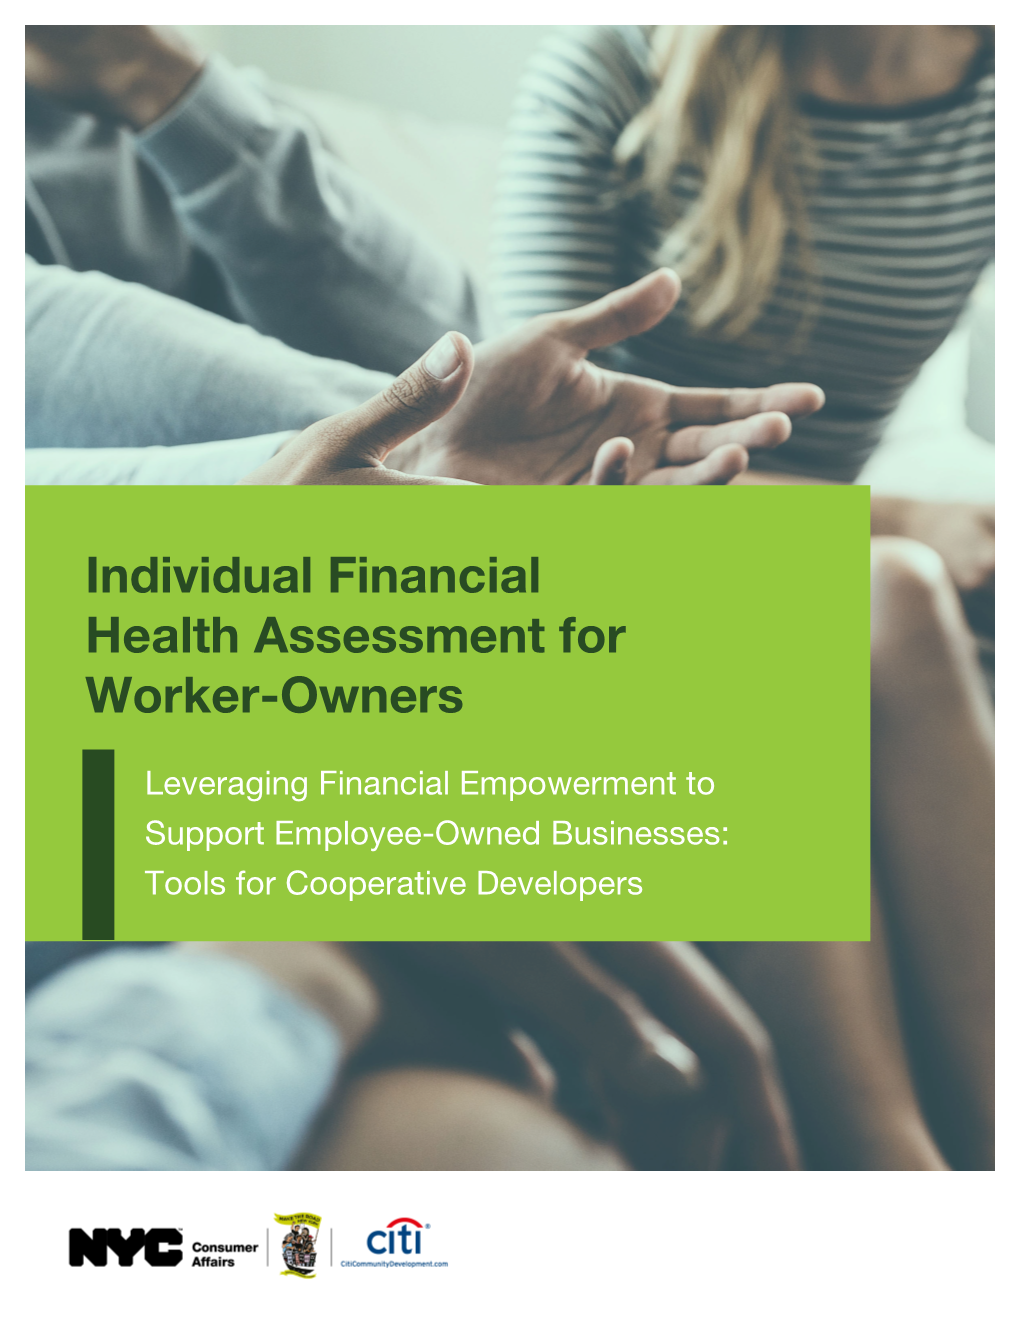 Individual Financial Health Assessment for Worker-Owners